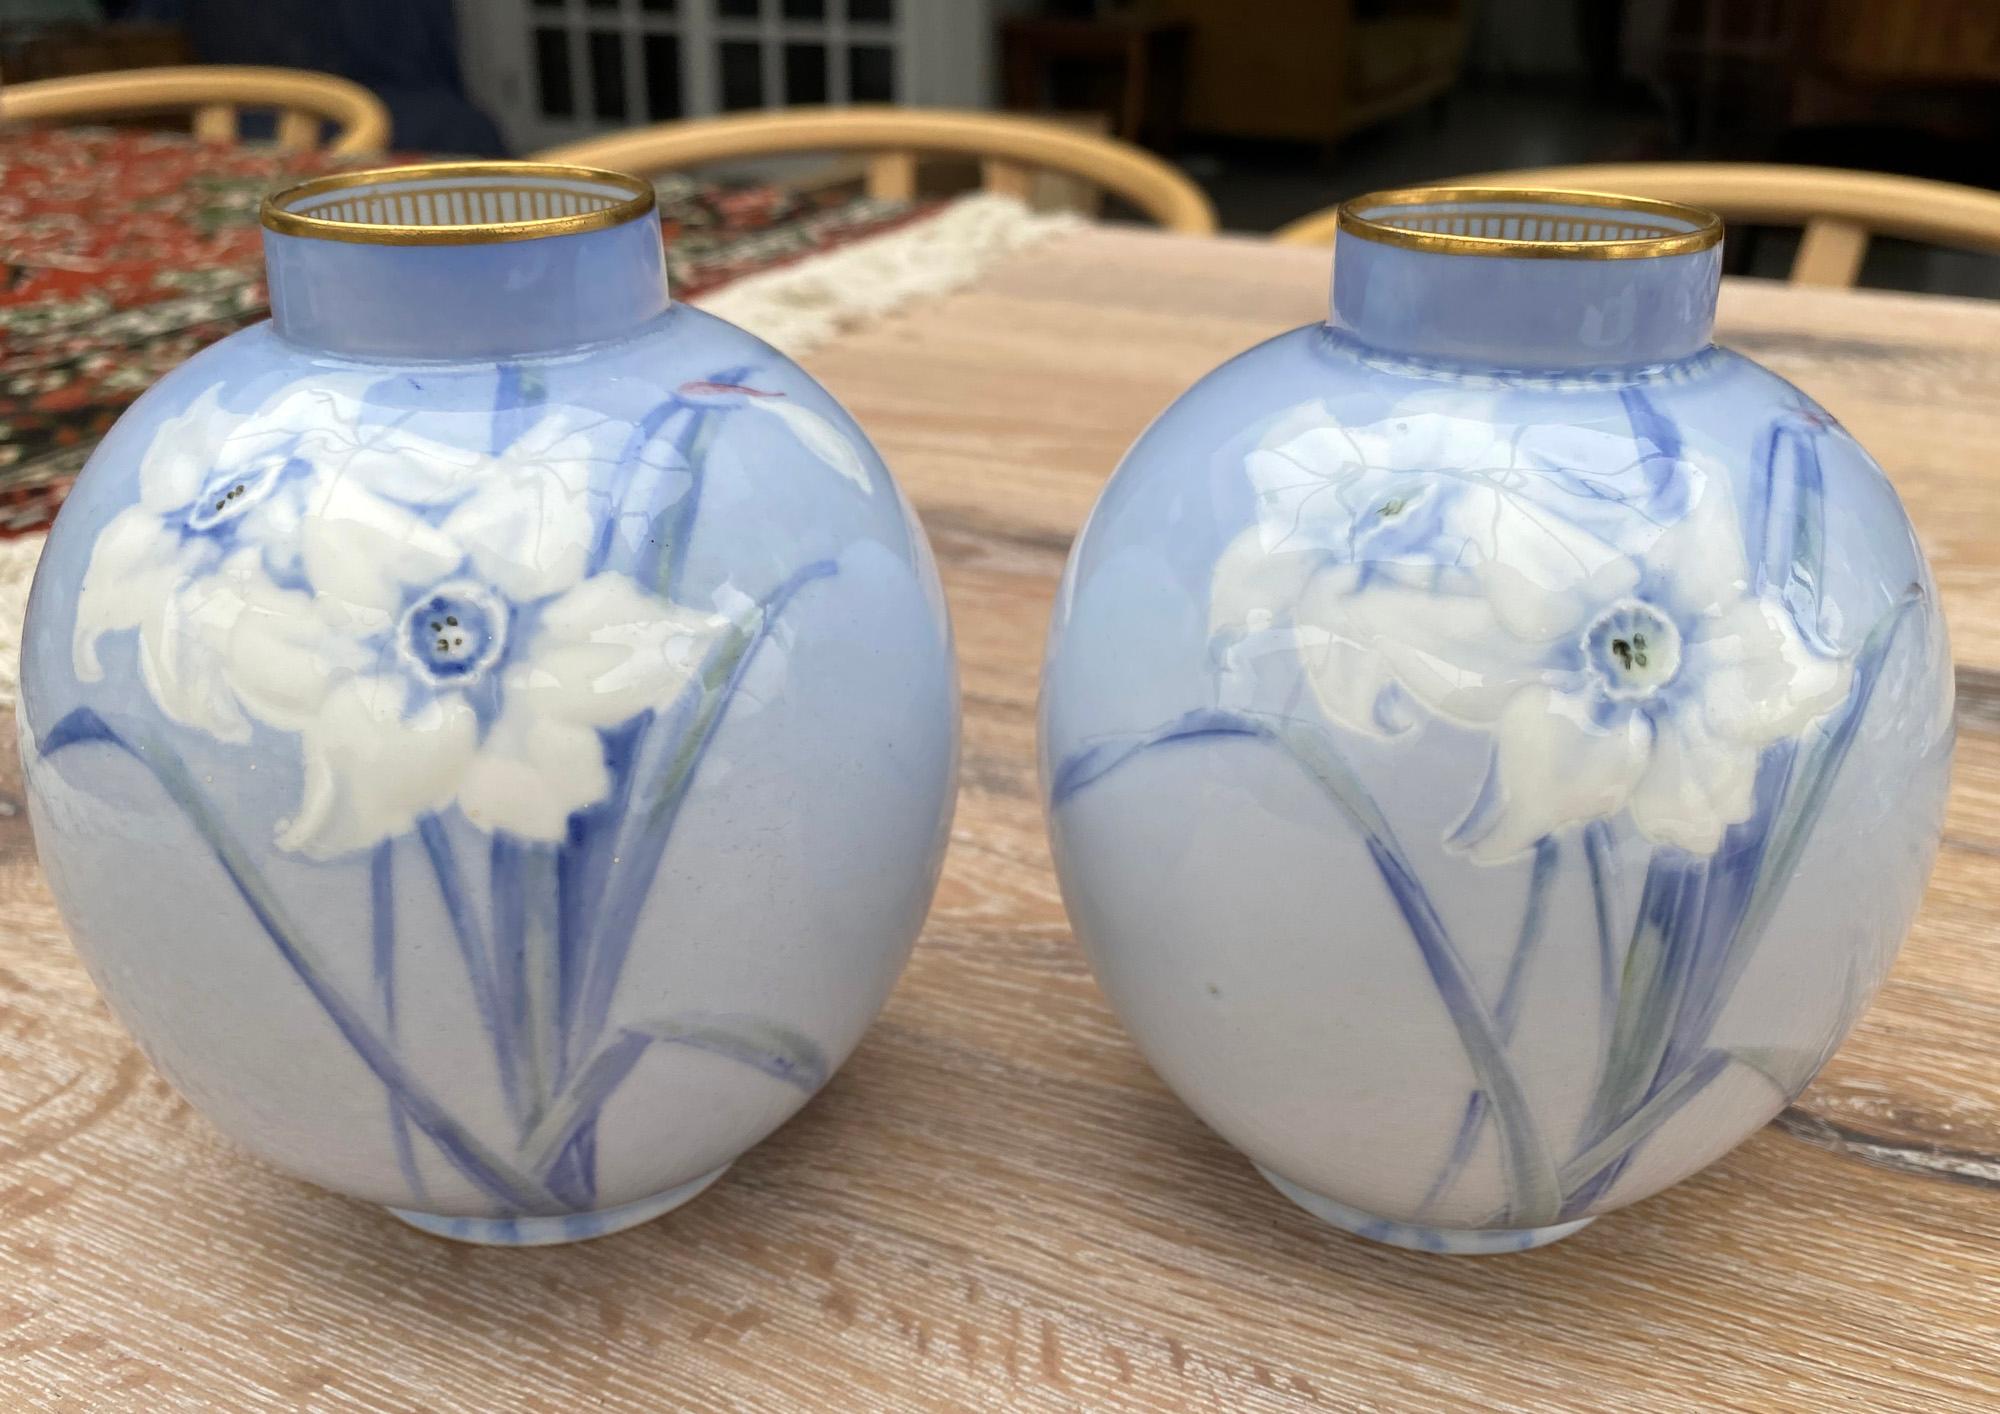 A fine pair Doulton Burslem porcelain vases of rounded bulbous shape hand decorated with daffodils in slip and painted designs in white and blue on a light blue ground by Jack Price. The vases have a gilded rim with patterning to the inside rim.